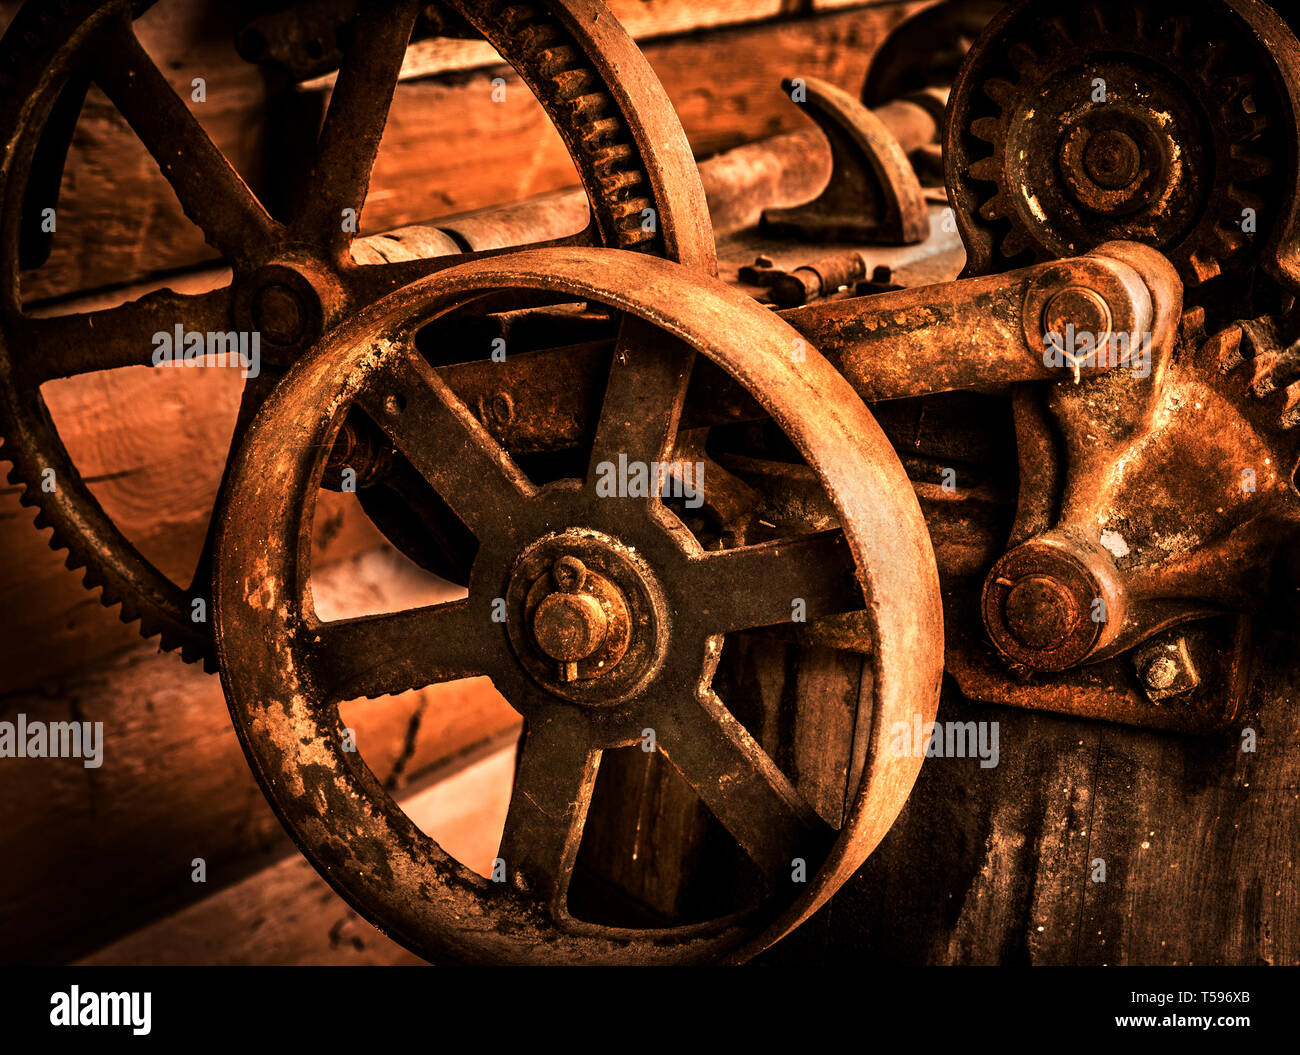 Gears on an antique washing machine. Stock Photo